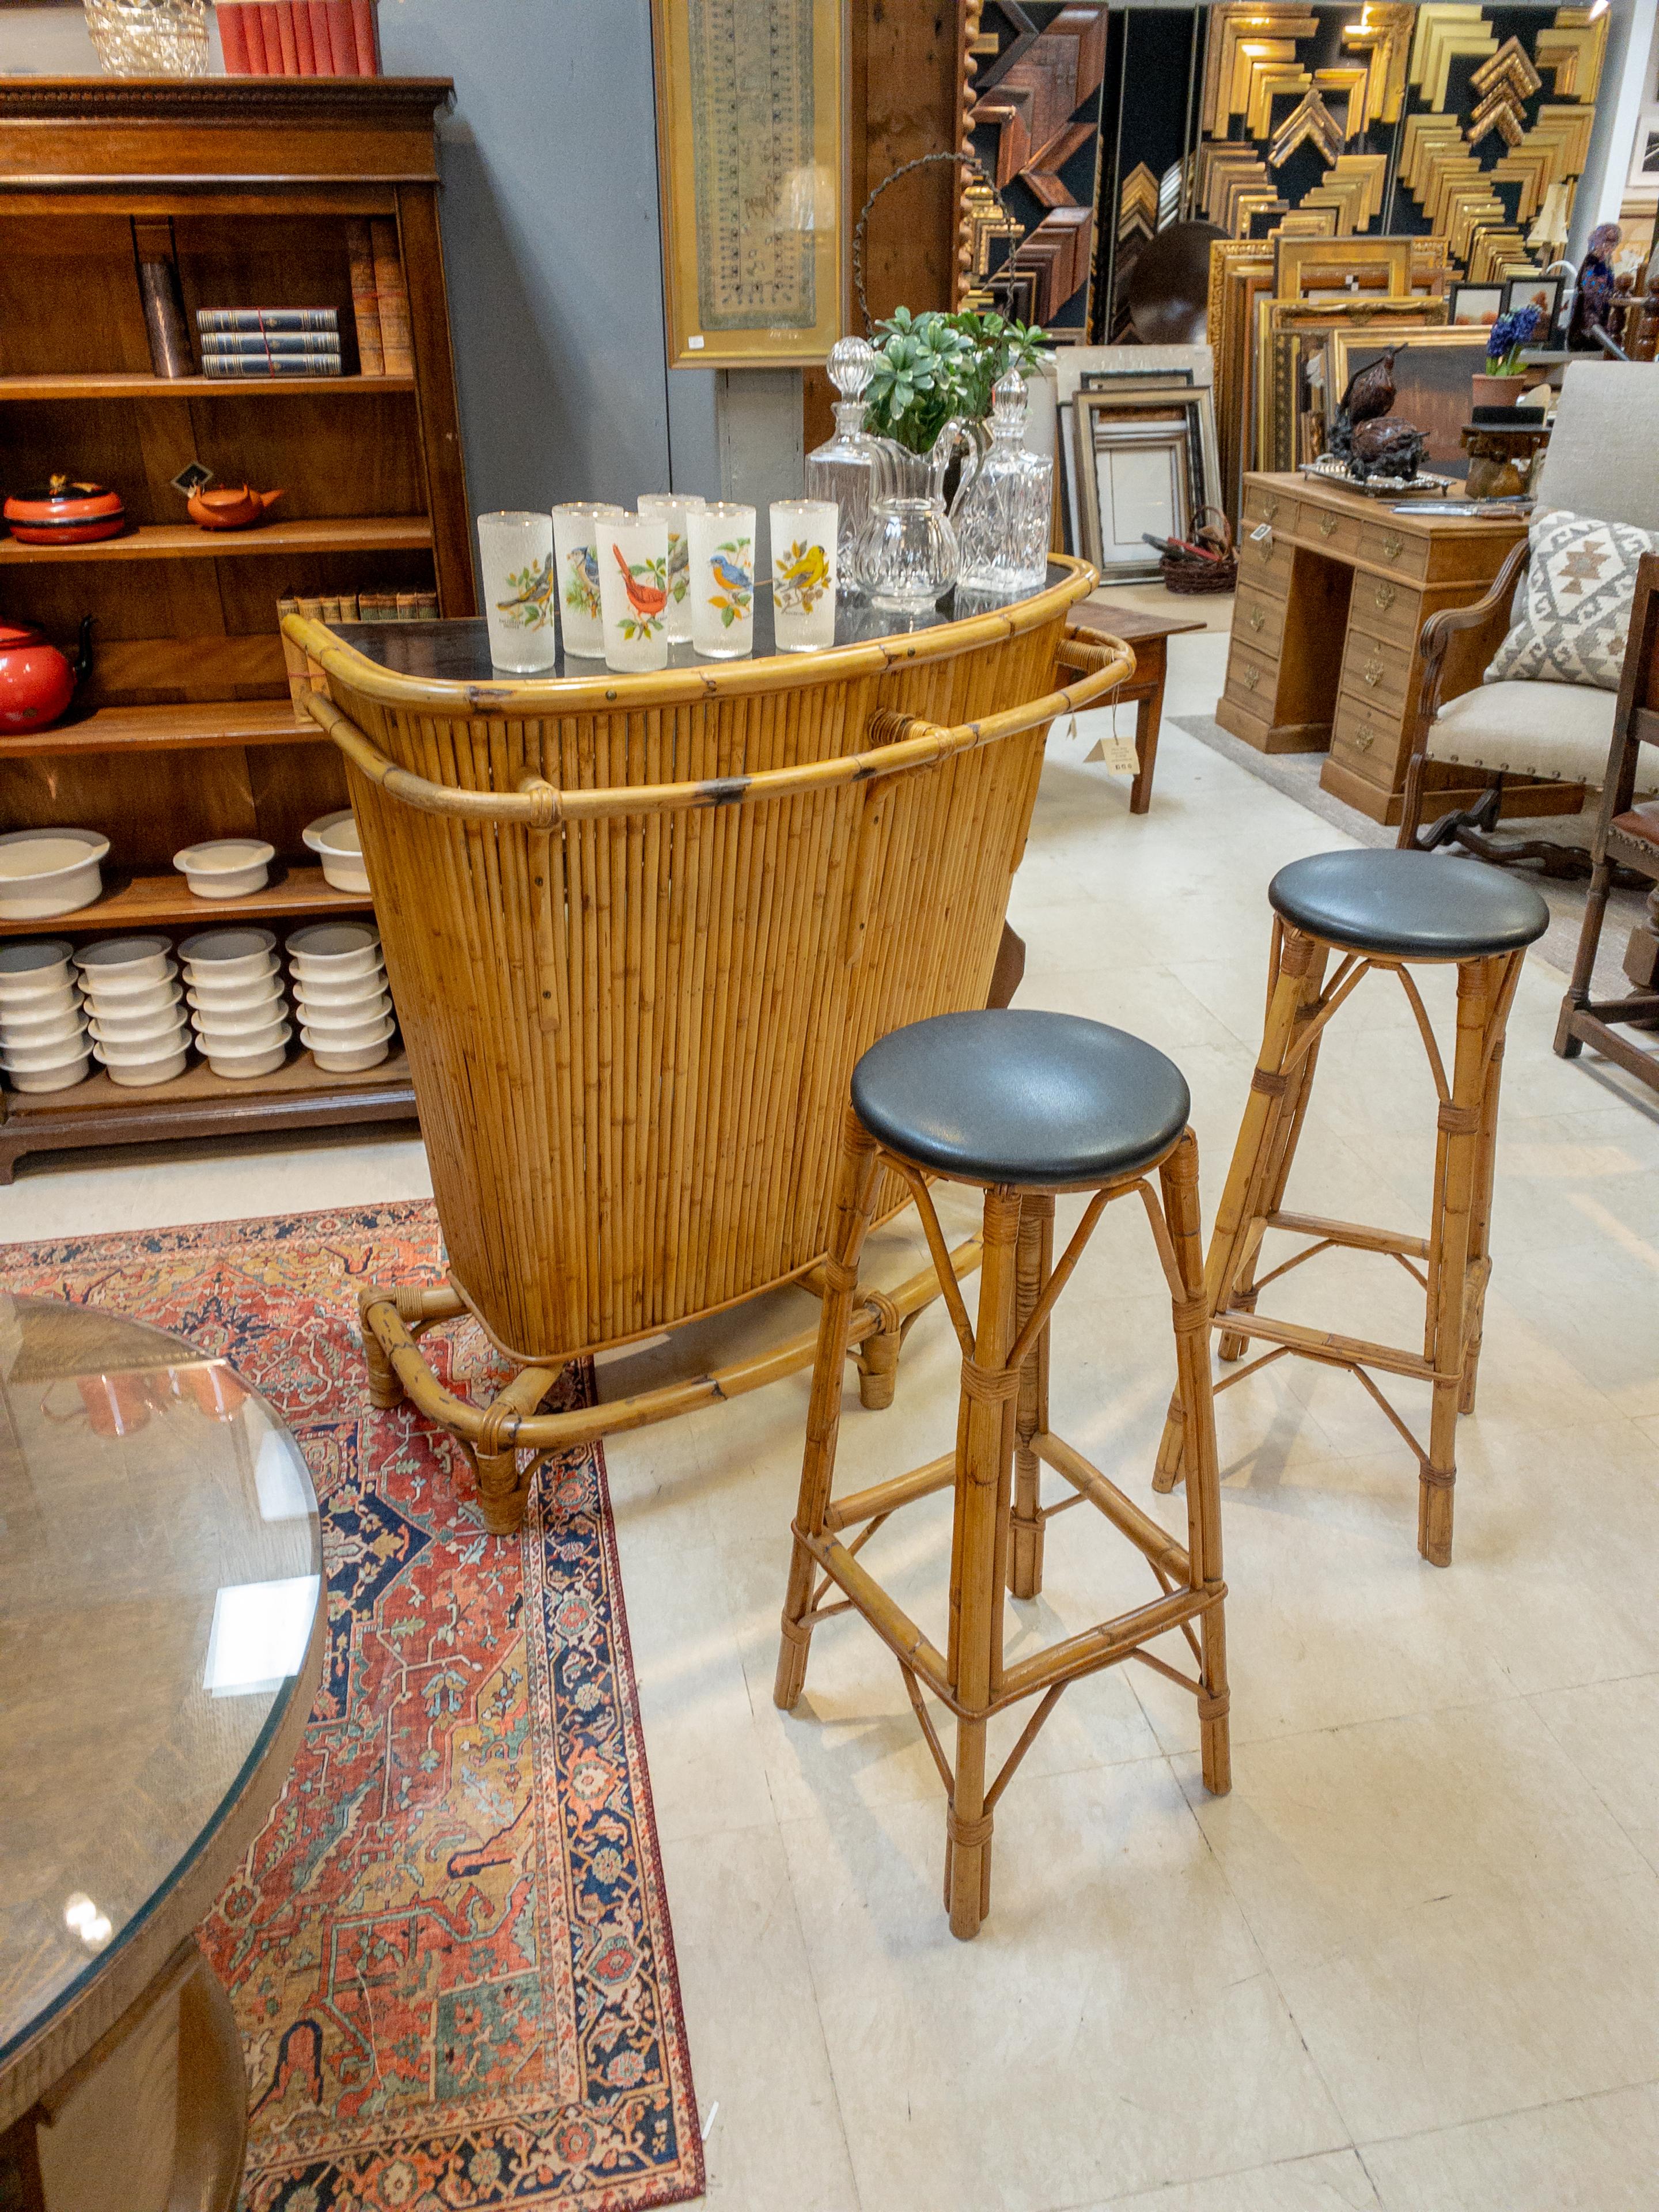 Transport yourself back to the swinging 1960s with this charming Bamboo Bar and Stools set. The epitome of retro chic, the bar boasts a sleek Formica top surface, perfect for mixing cocktails or serving snacks. Its body, crafted from scorched